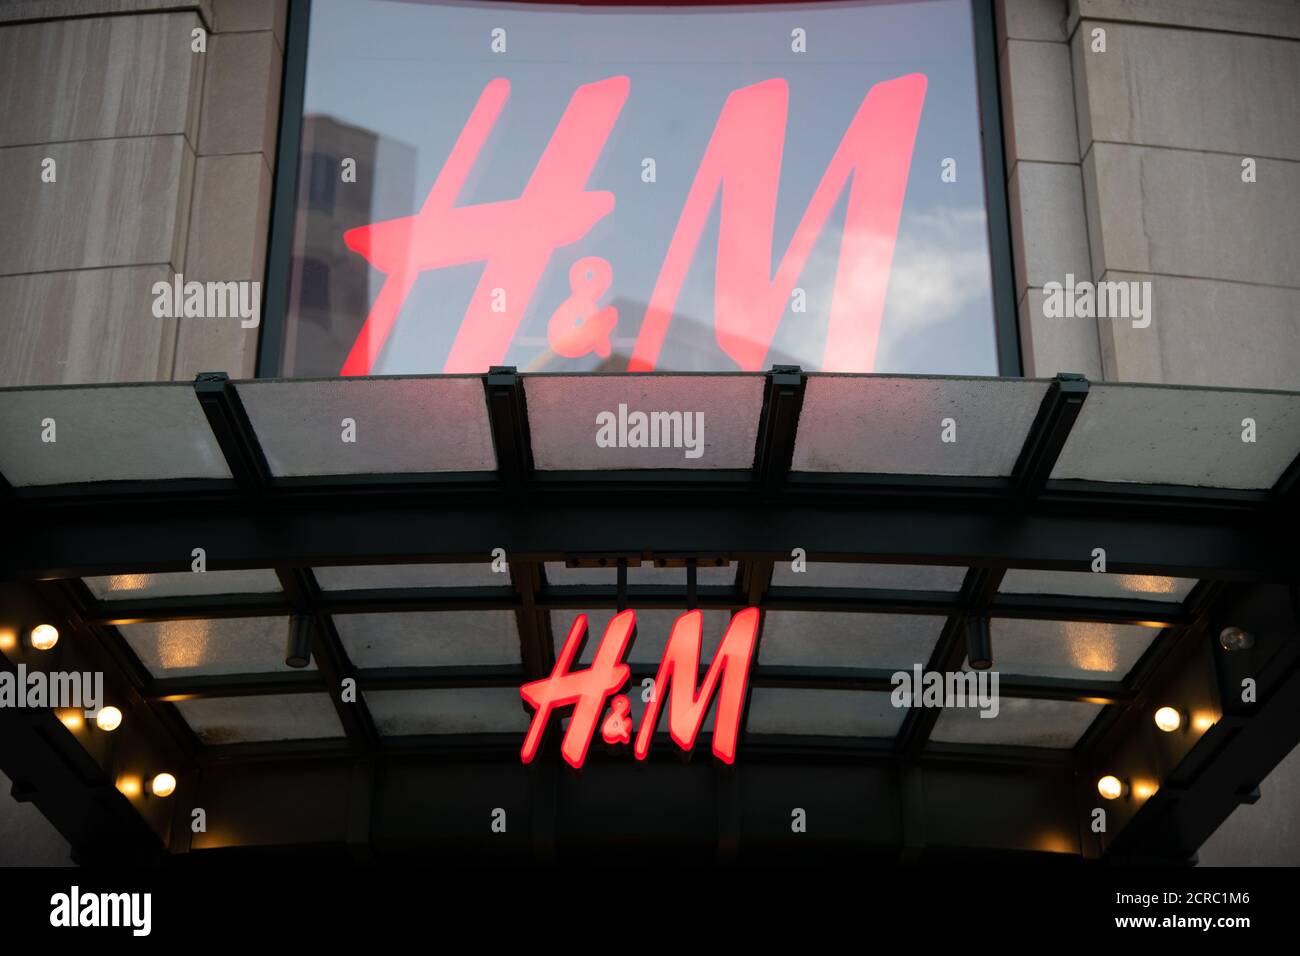 Washington, USA. 19th Sep, 2020. A general view of an H&M logo on a  storefront in Washington, DC, on September 19, 2020 amid the coronavirus  pandemic. The day after the passing of